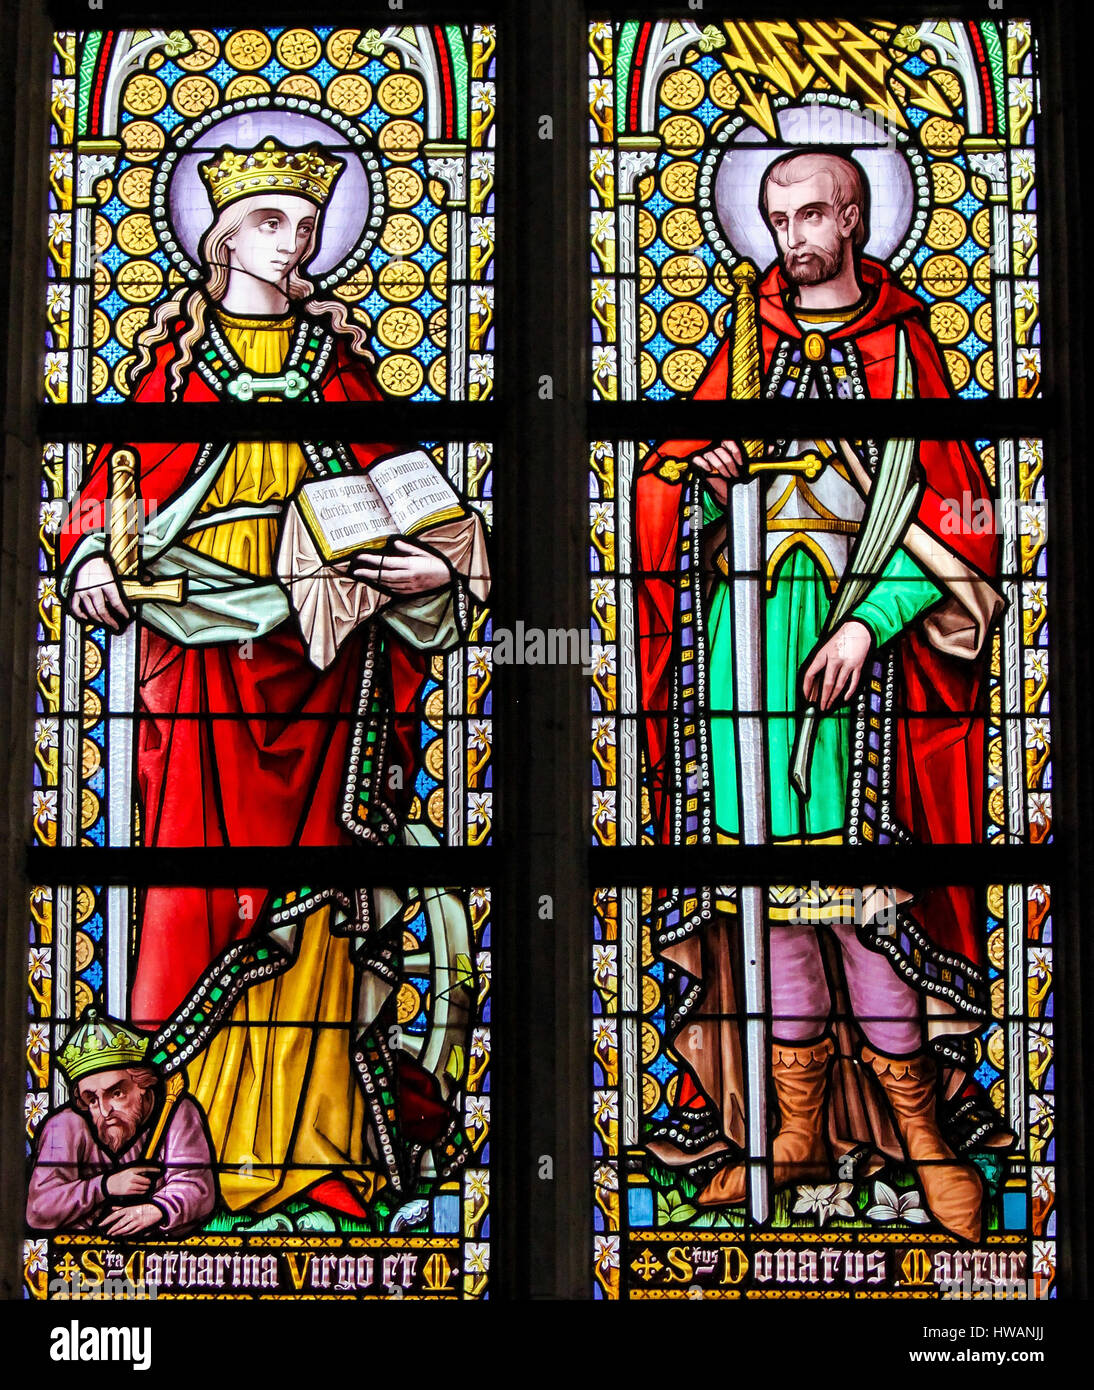 Stained Glass in the Church of Our Lady of the Sablon in Brussels, depicting Saint Catherine and Saint Donatus, patron lightning strik Stock Photo - Alamy